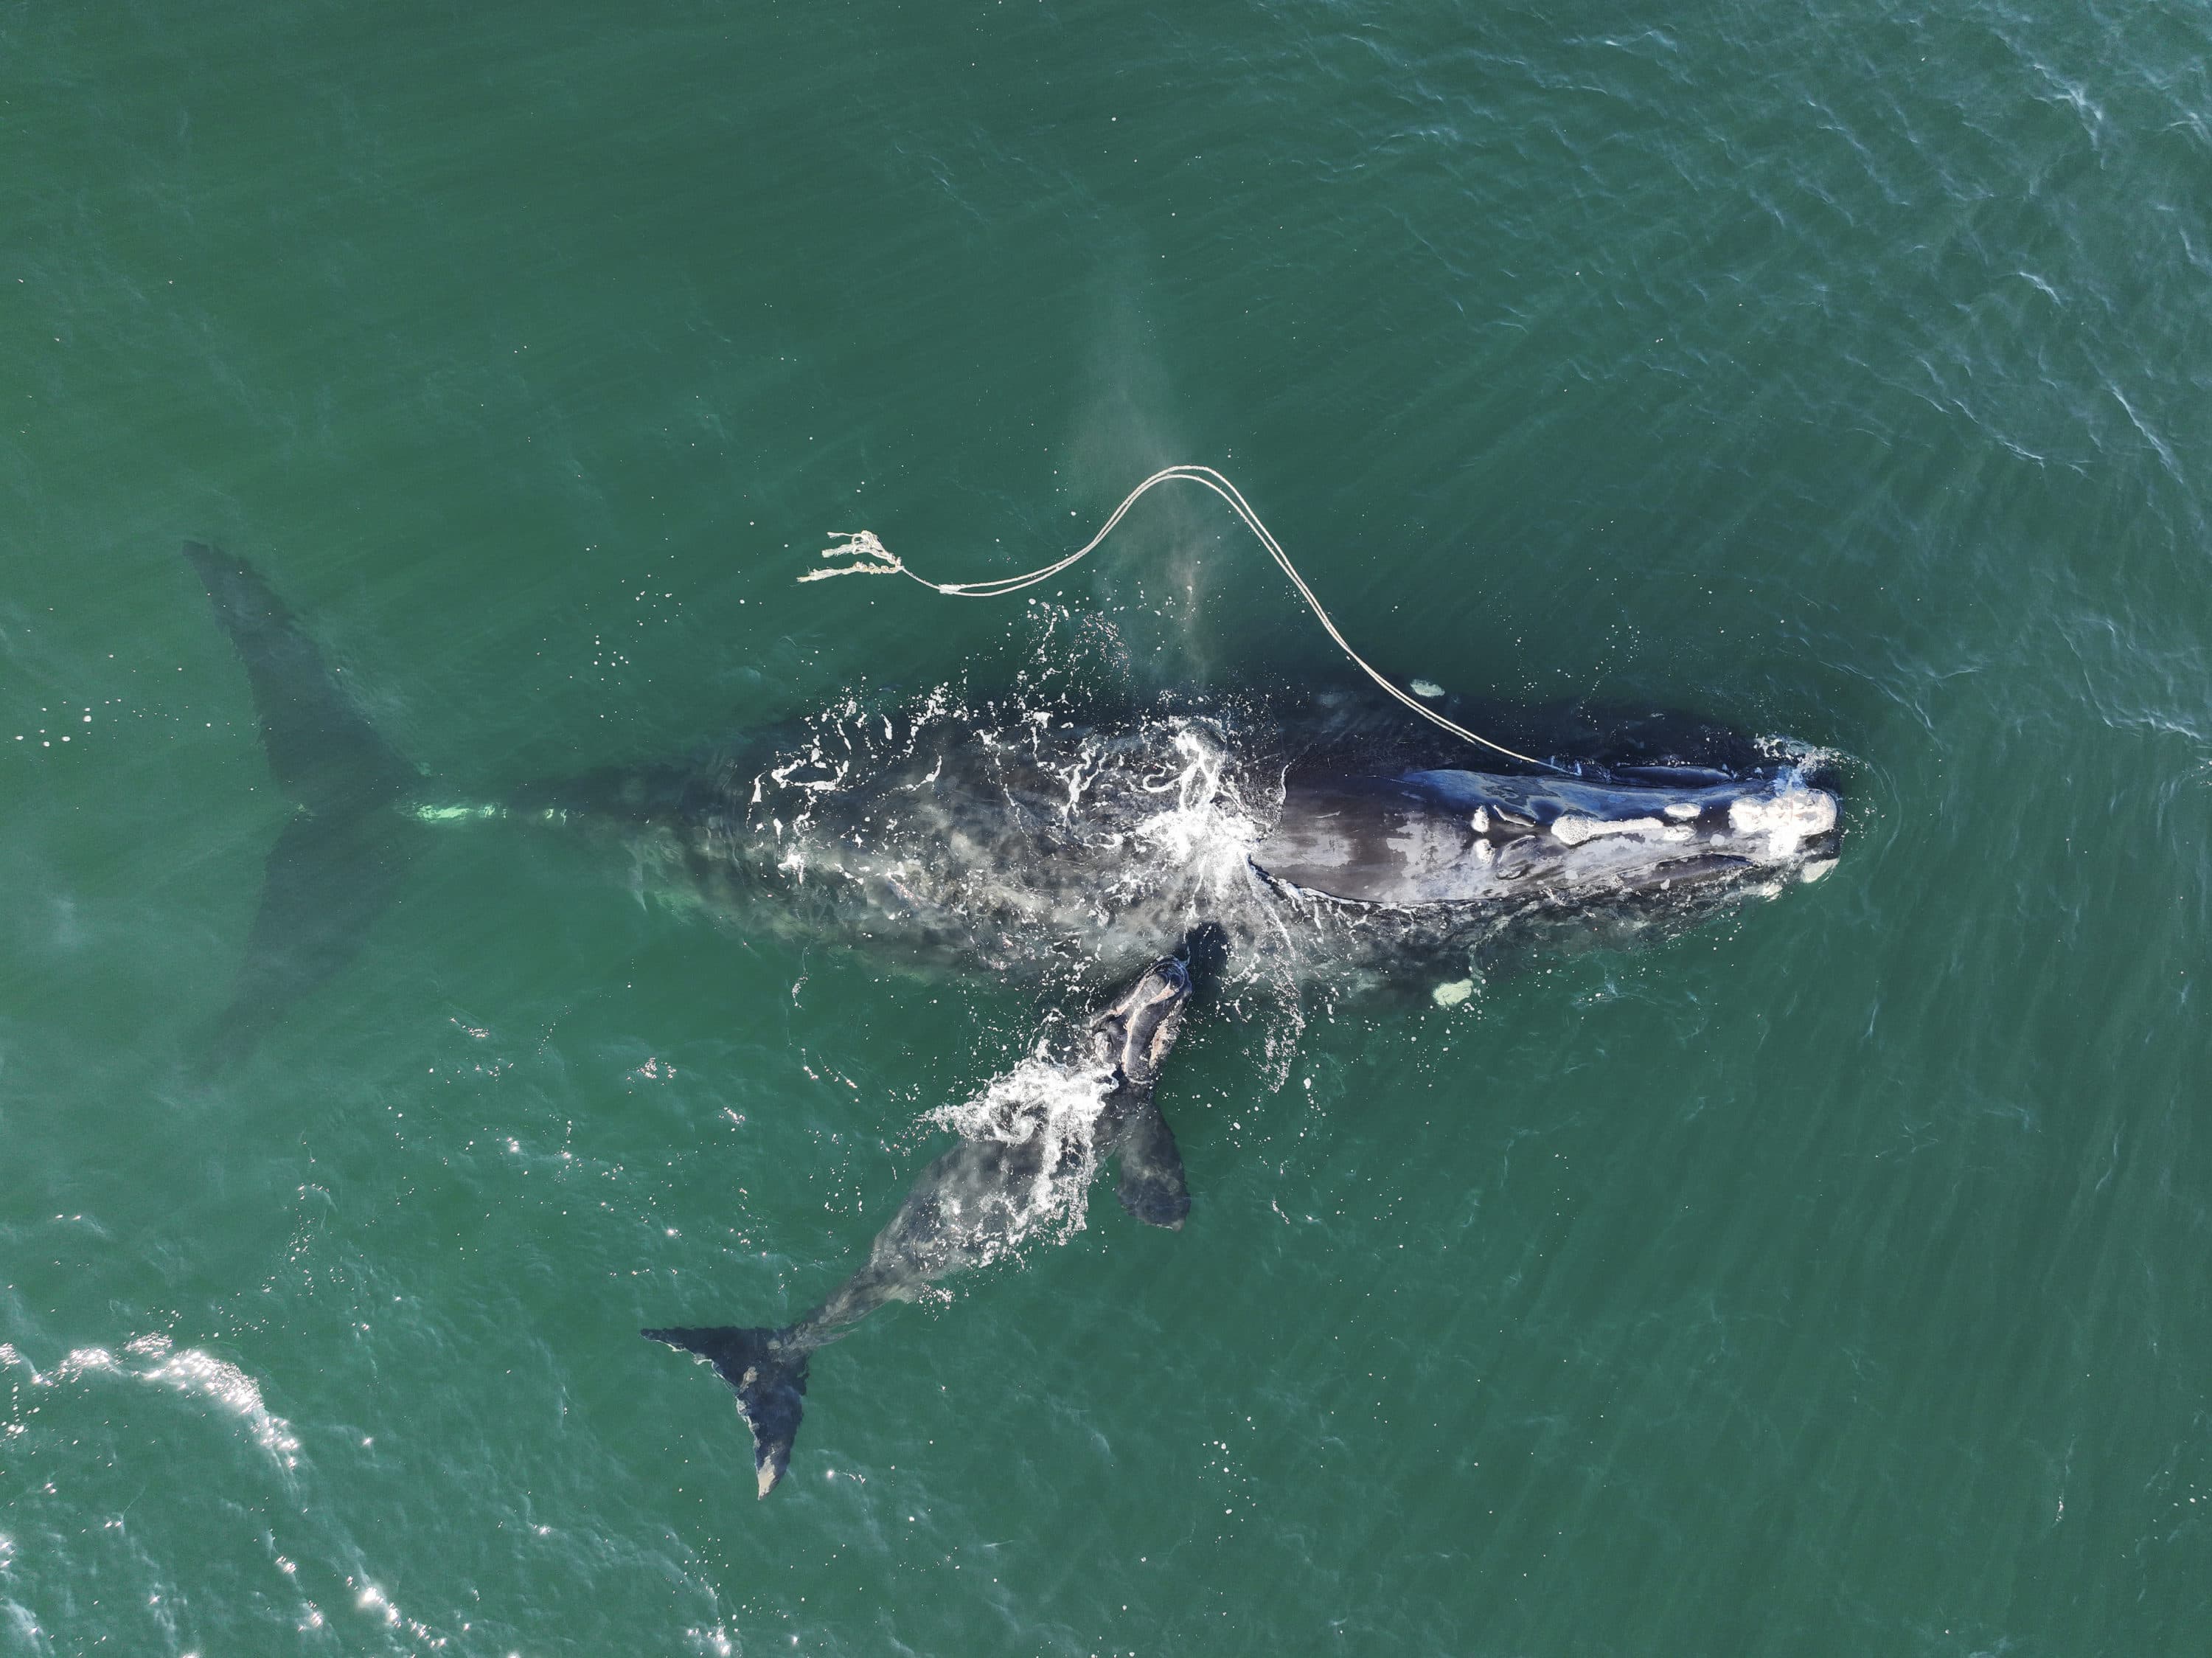 This Dec. 2, 2021, photo shows an endangered North Atlantic right whale entangled in fishing rope being sighted with a newborn calf in waters near Cumberland Island, Georgia. (Georgia Department of Natural Resources/NOAA Permit #20556 via AP)